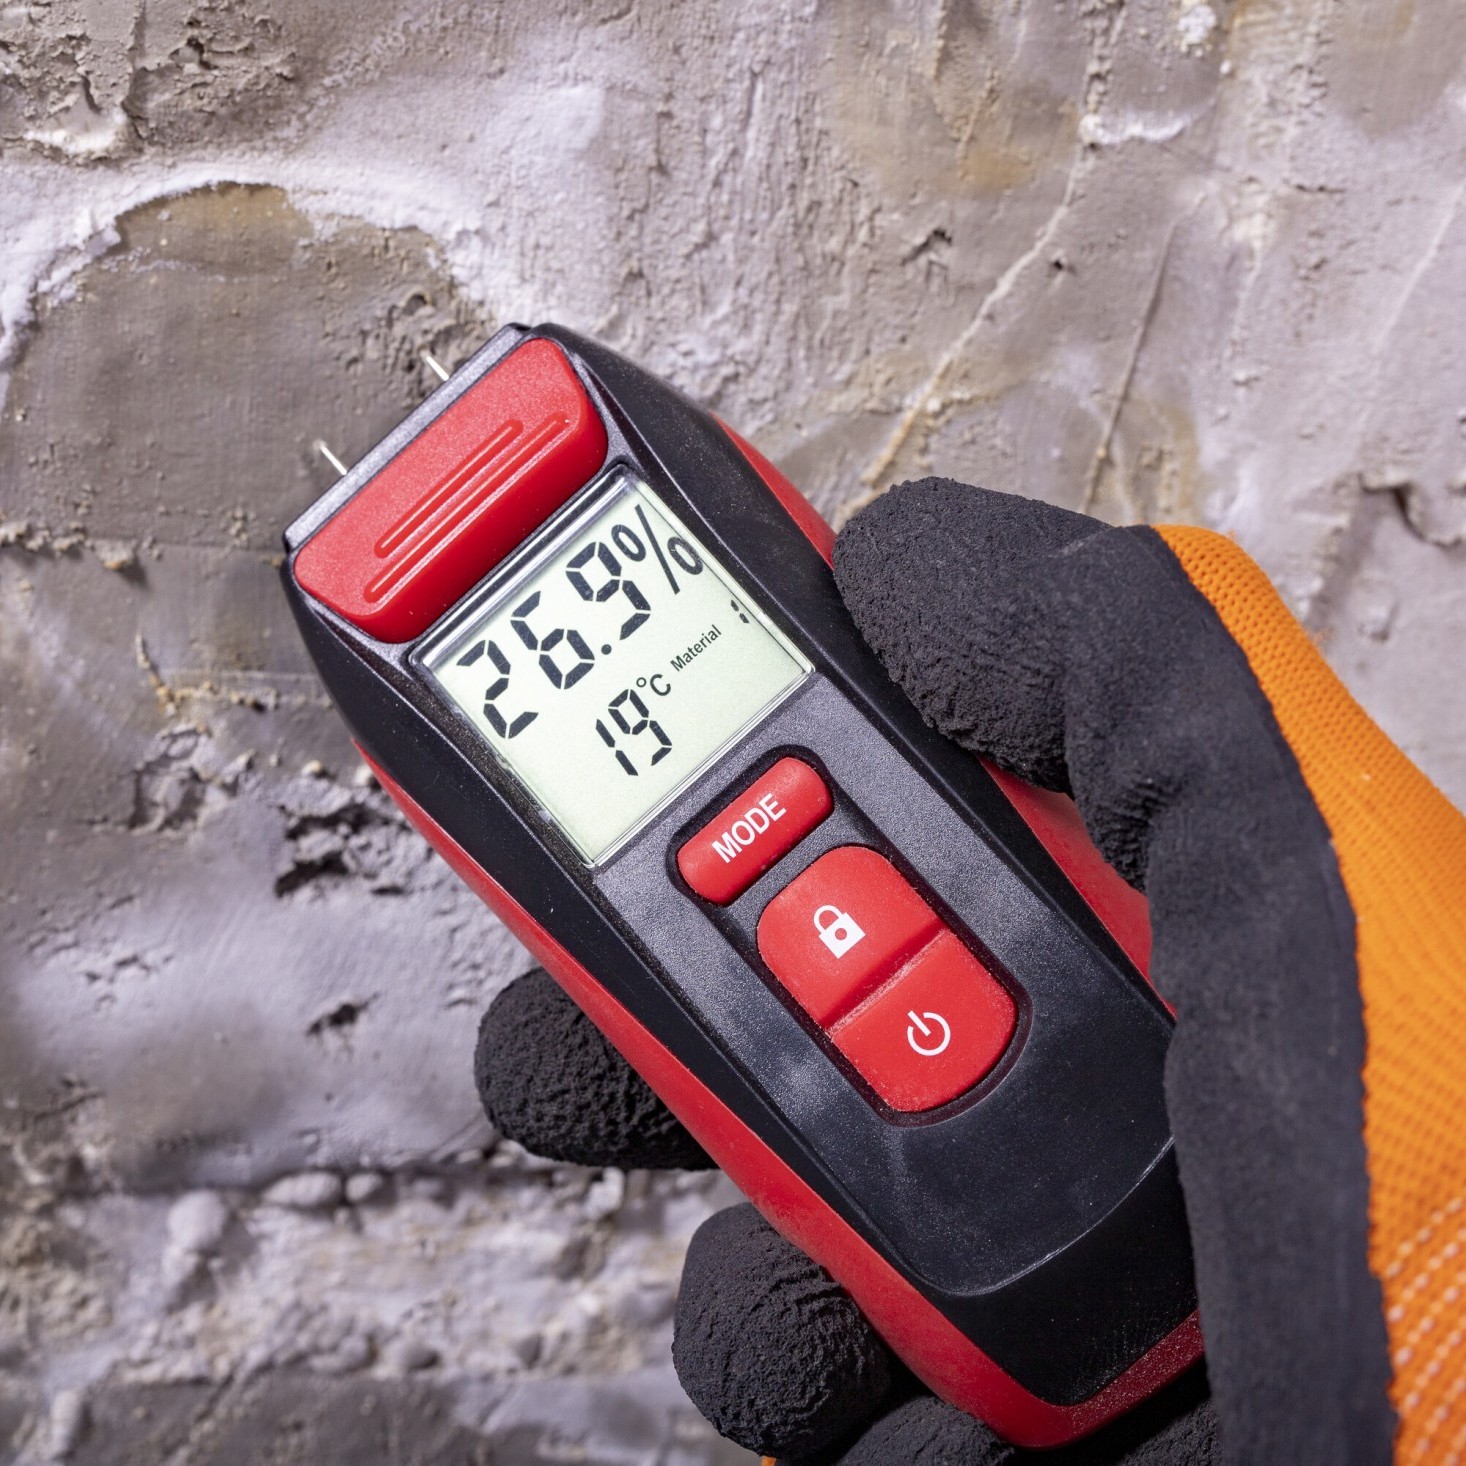 Frequently Asked Questions about Basement Waterproofing in Milton